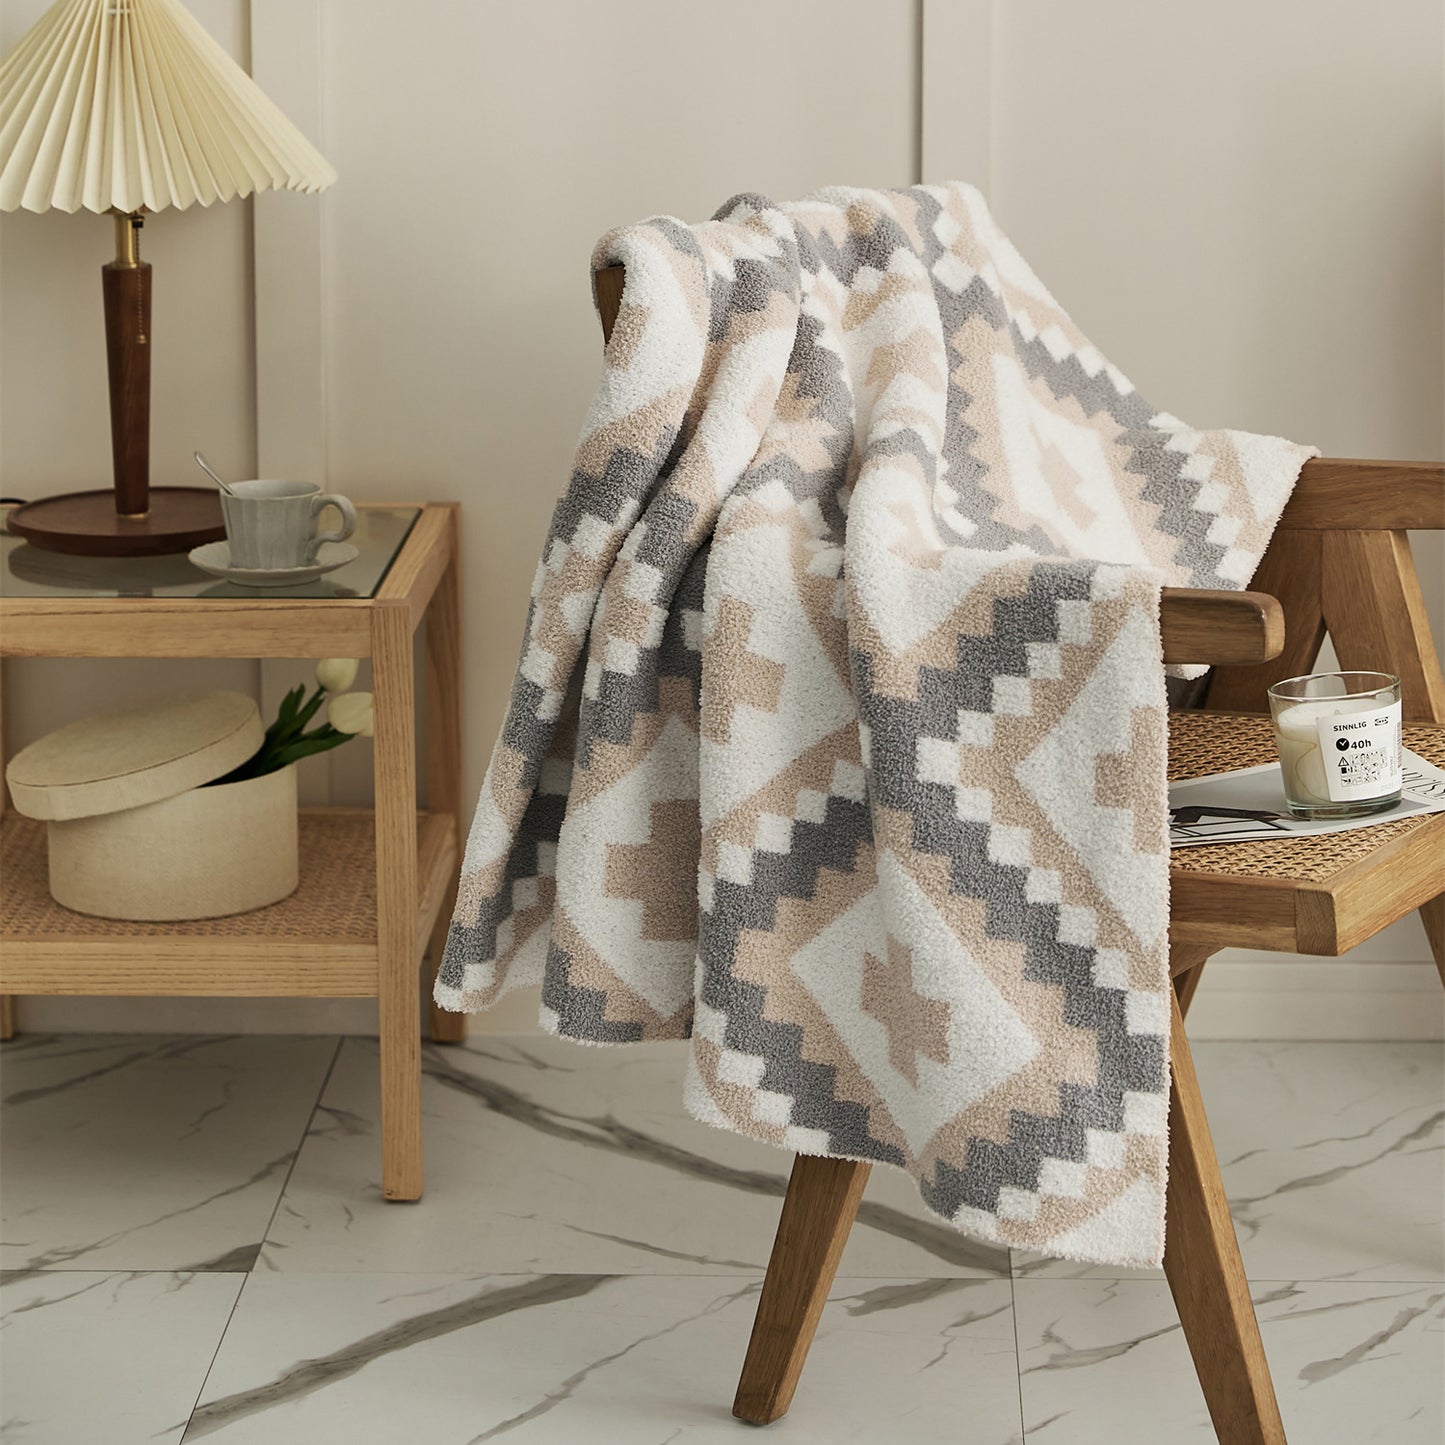 Geometric Patterns Fleece Blanket Pure Cotton Tapestry Knitted Throw Blanket 130 x 160 CM